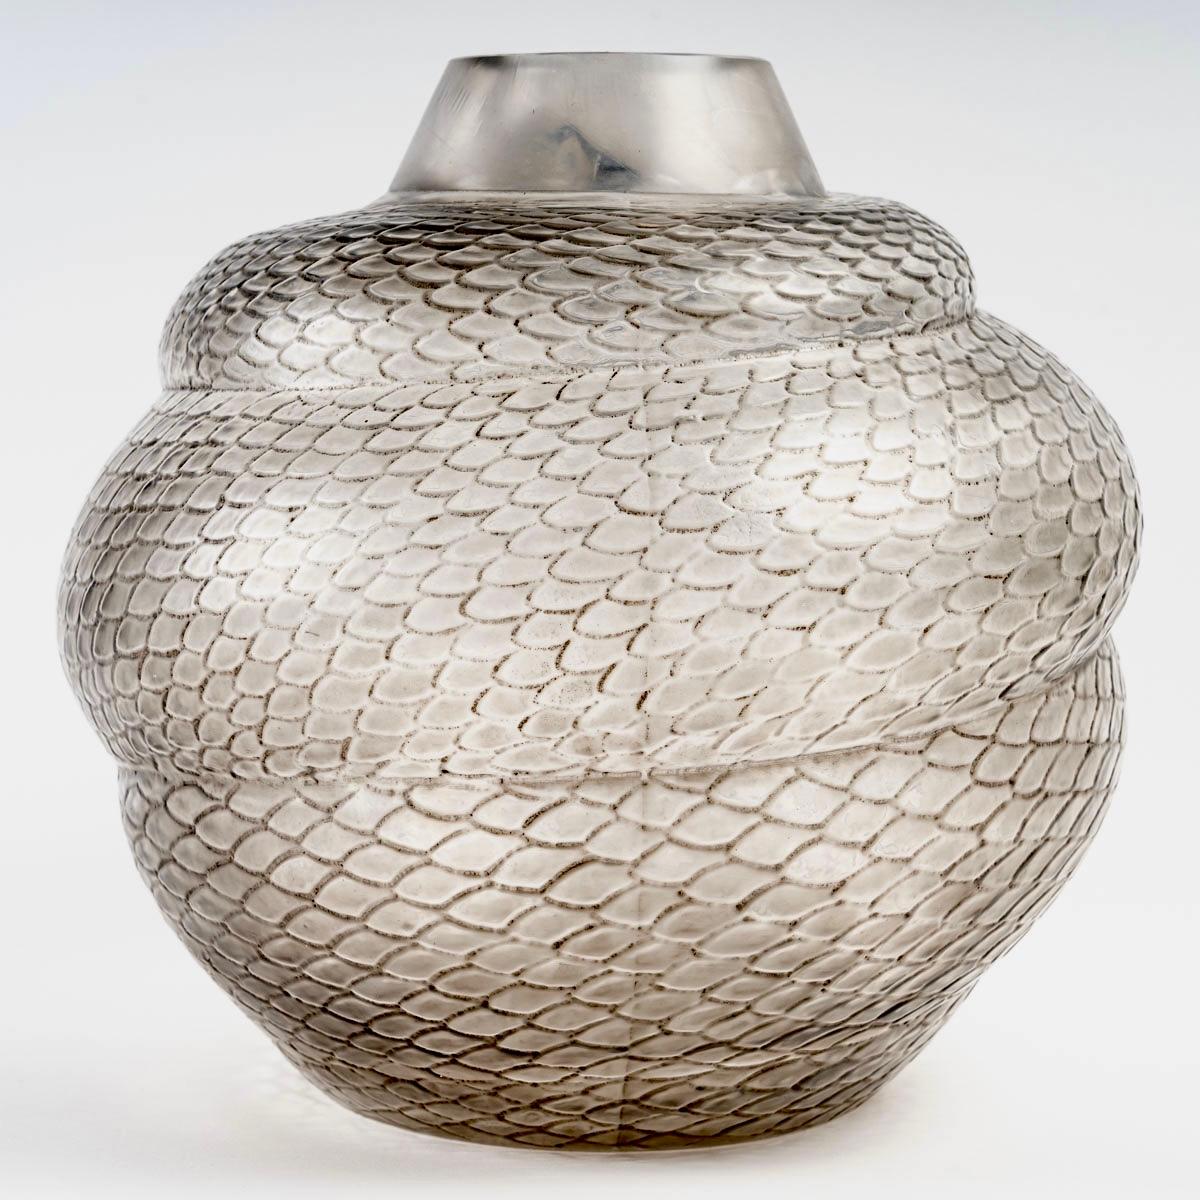 French 1924 René Lalique Serpent Vase in Frosted Glass with Grey Patina, Snake